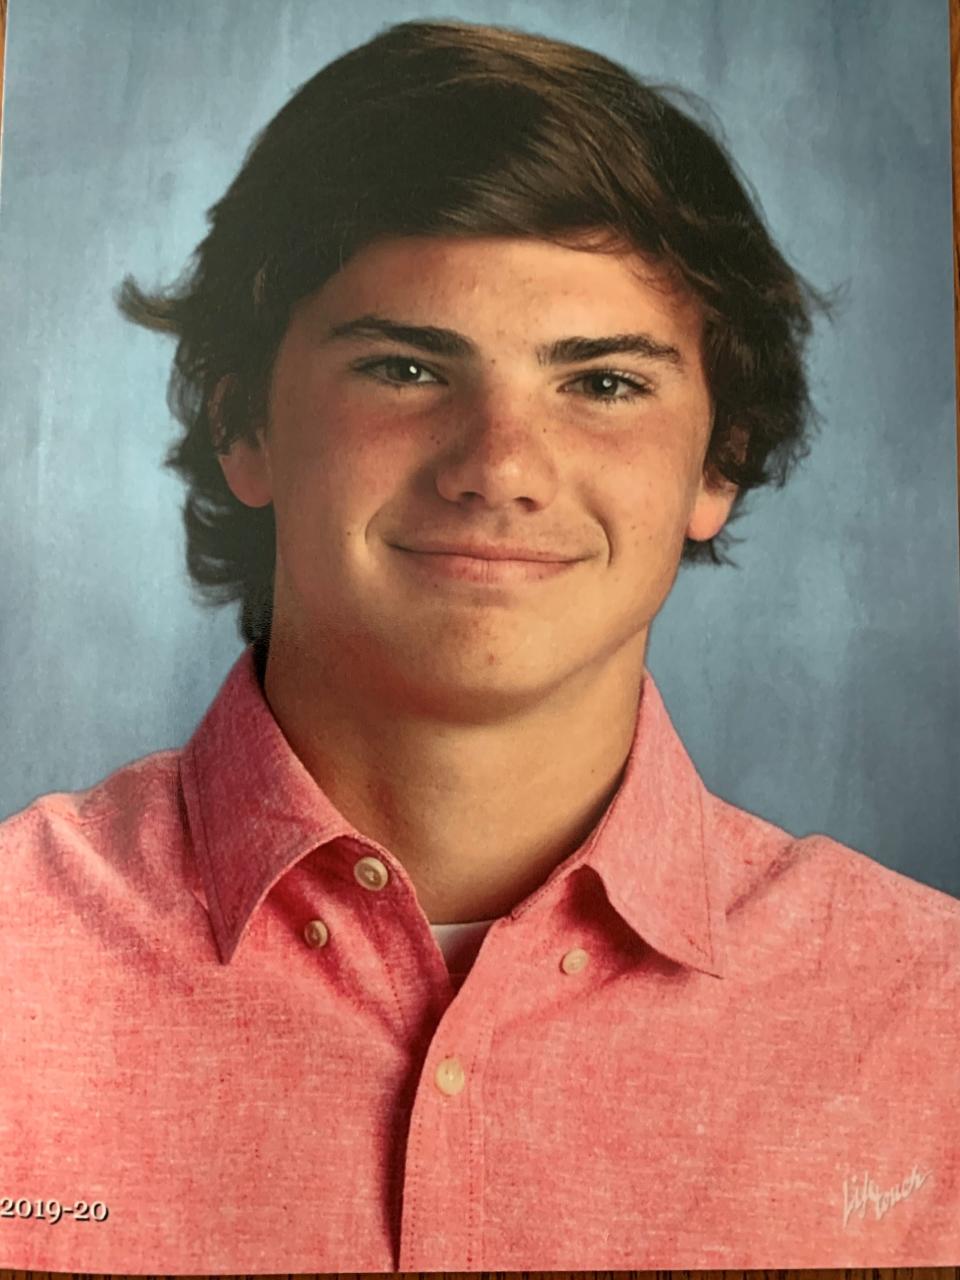 Matt Mangine, an incoming junior at St. Henry District High School, died suddenly after soccer training drills on June 16, 2020.